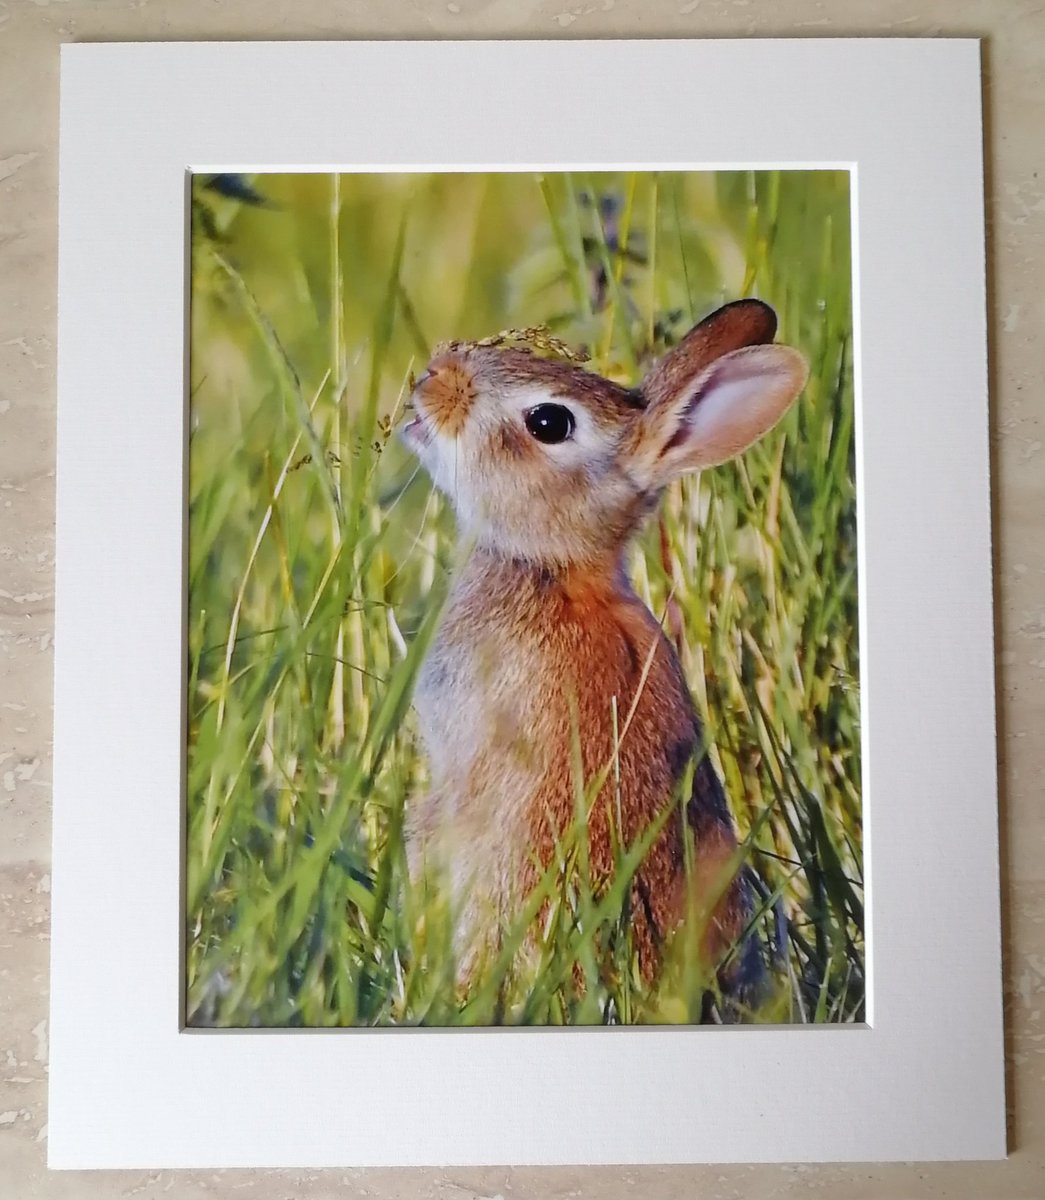 'Young Rabbit in the meadow' 10x8 mounted print. You can buy it here; https://www.carlbovis.com/product-page/young-rabbit-in-the-meadow-10x8-mounted-print 